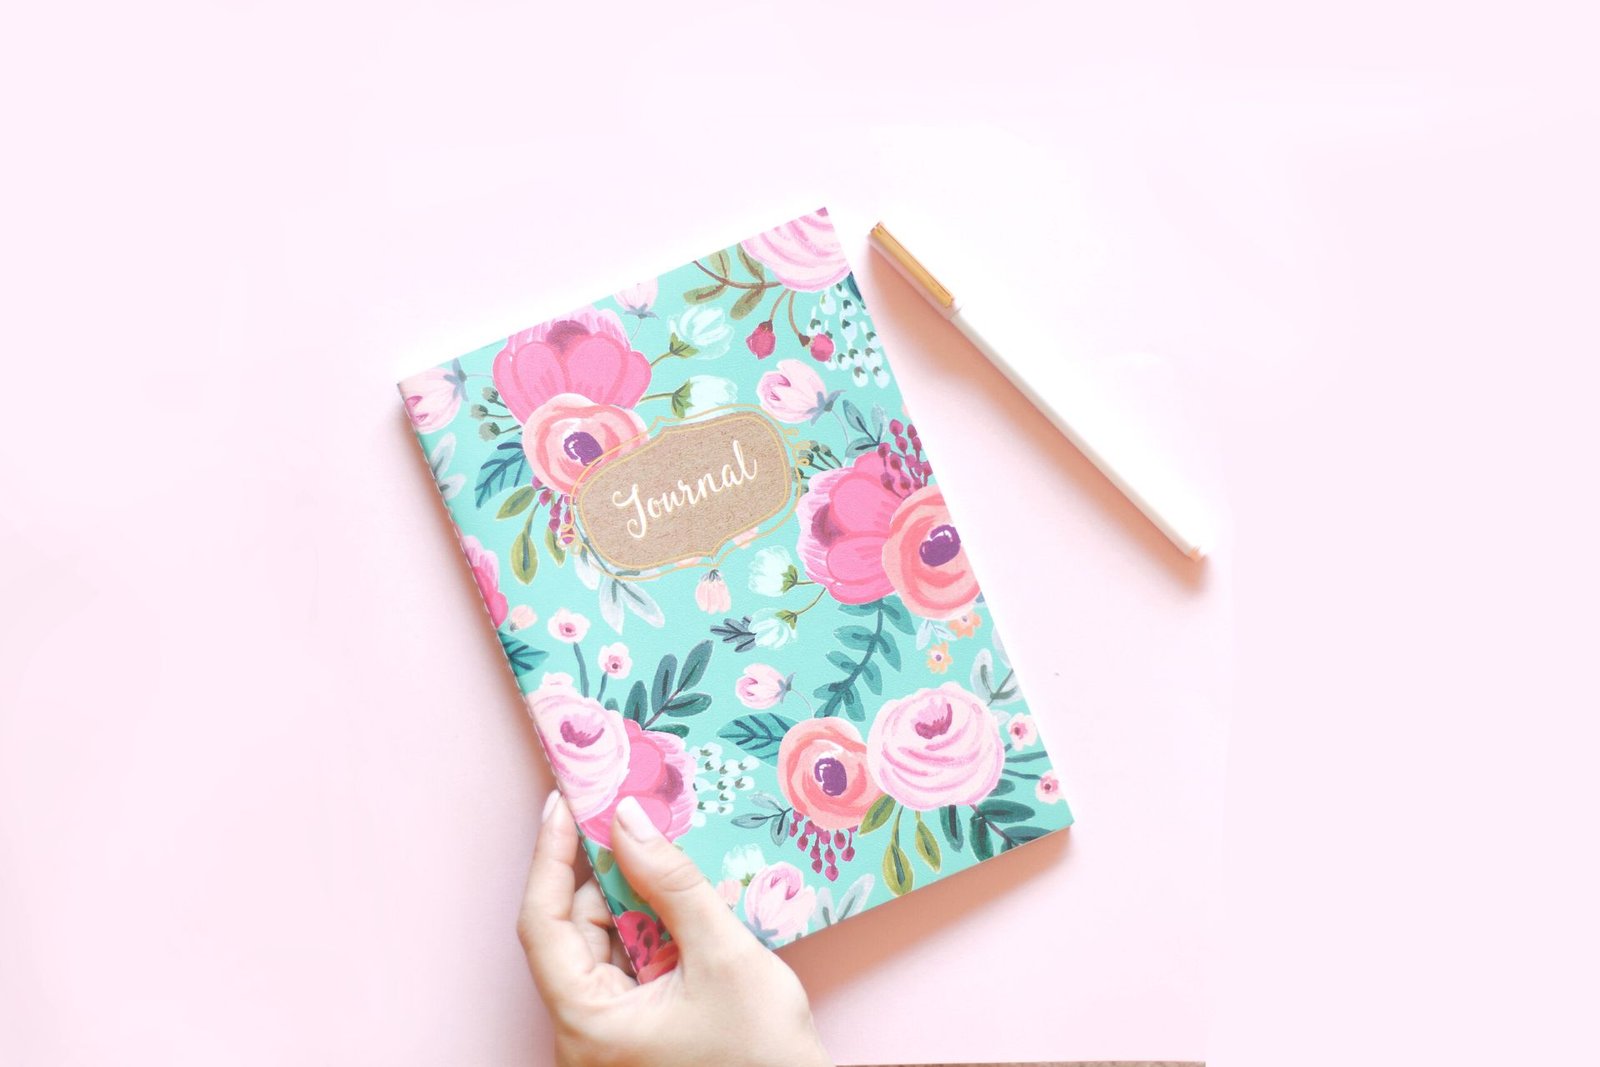 Floral Print Journal with Pen - Postpartum Journal Prompts